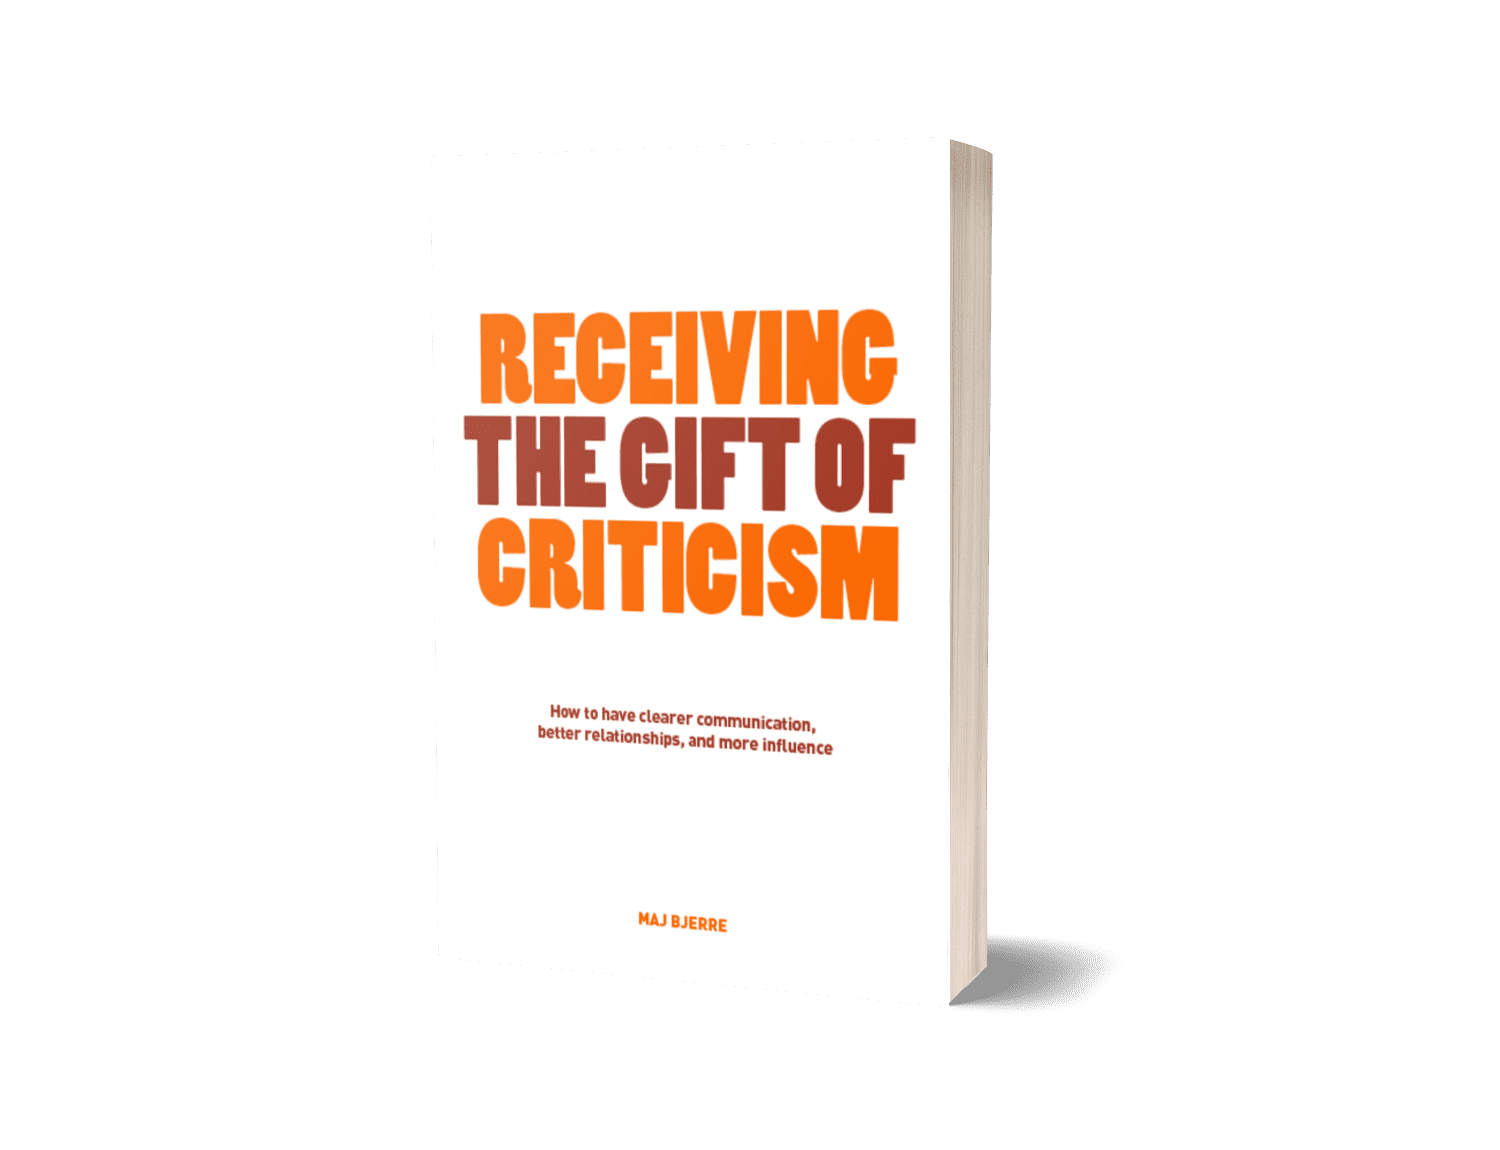 Book about receiving criticism